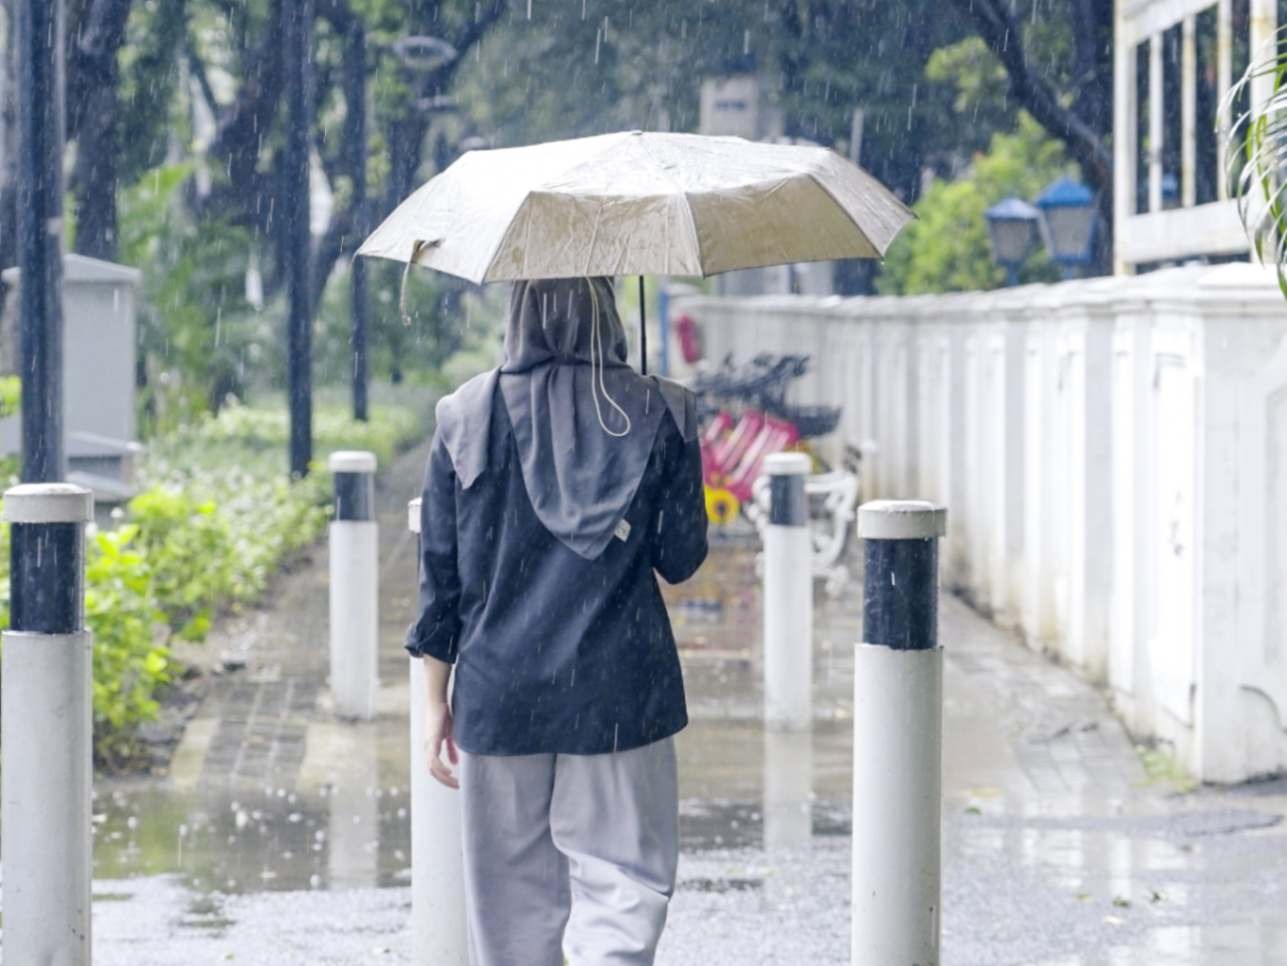 High rainfall has the potential to cause flooding. Entering the rainy season, here are the ways to prevent flooding that you need to know.